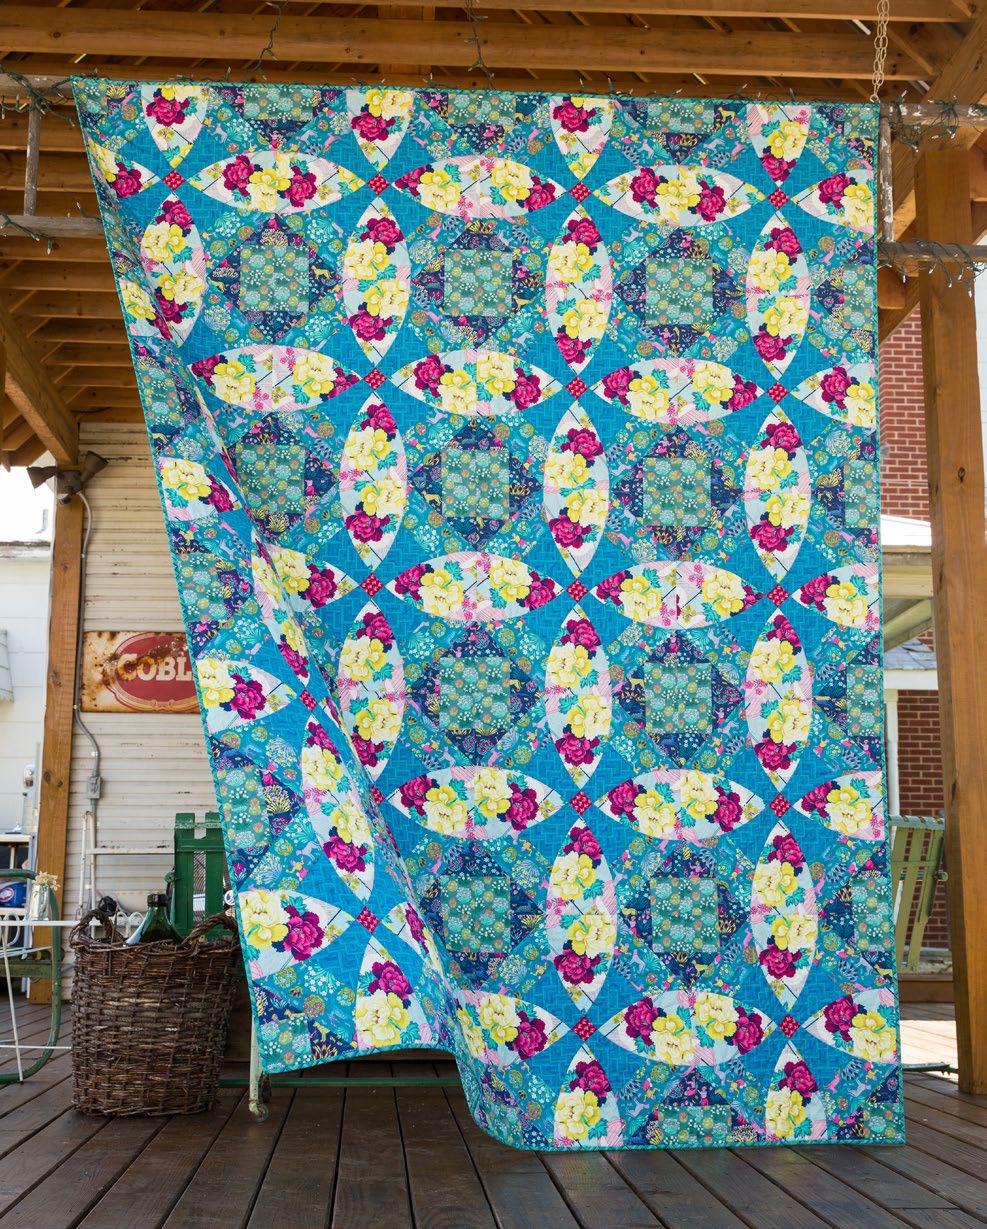 Featuring Splendor by Amy Butler Curved piecing is the secret to this beautiful quilt showcasing Amy Butler s Splendor fabrics. It looks intricate, but templates make it a splendiferous experience.